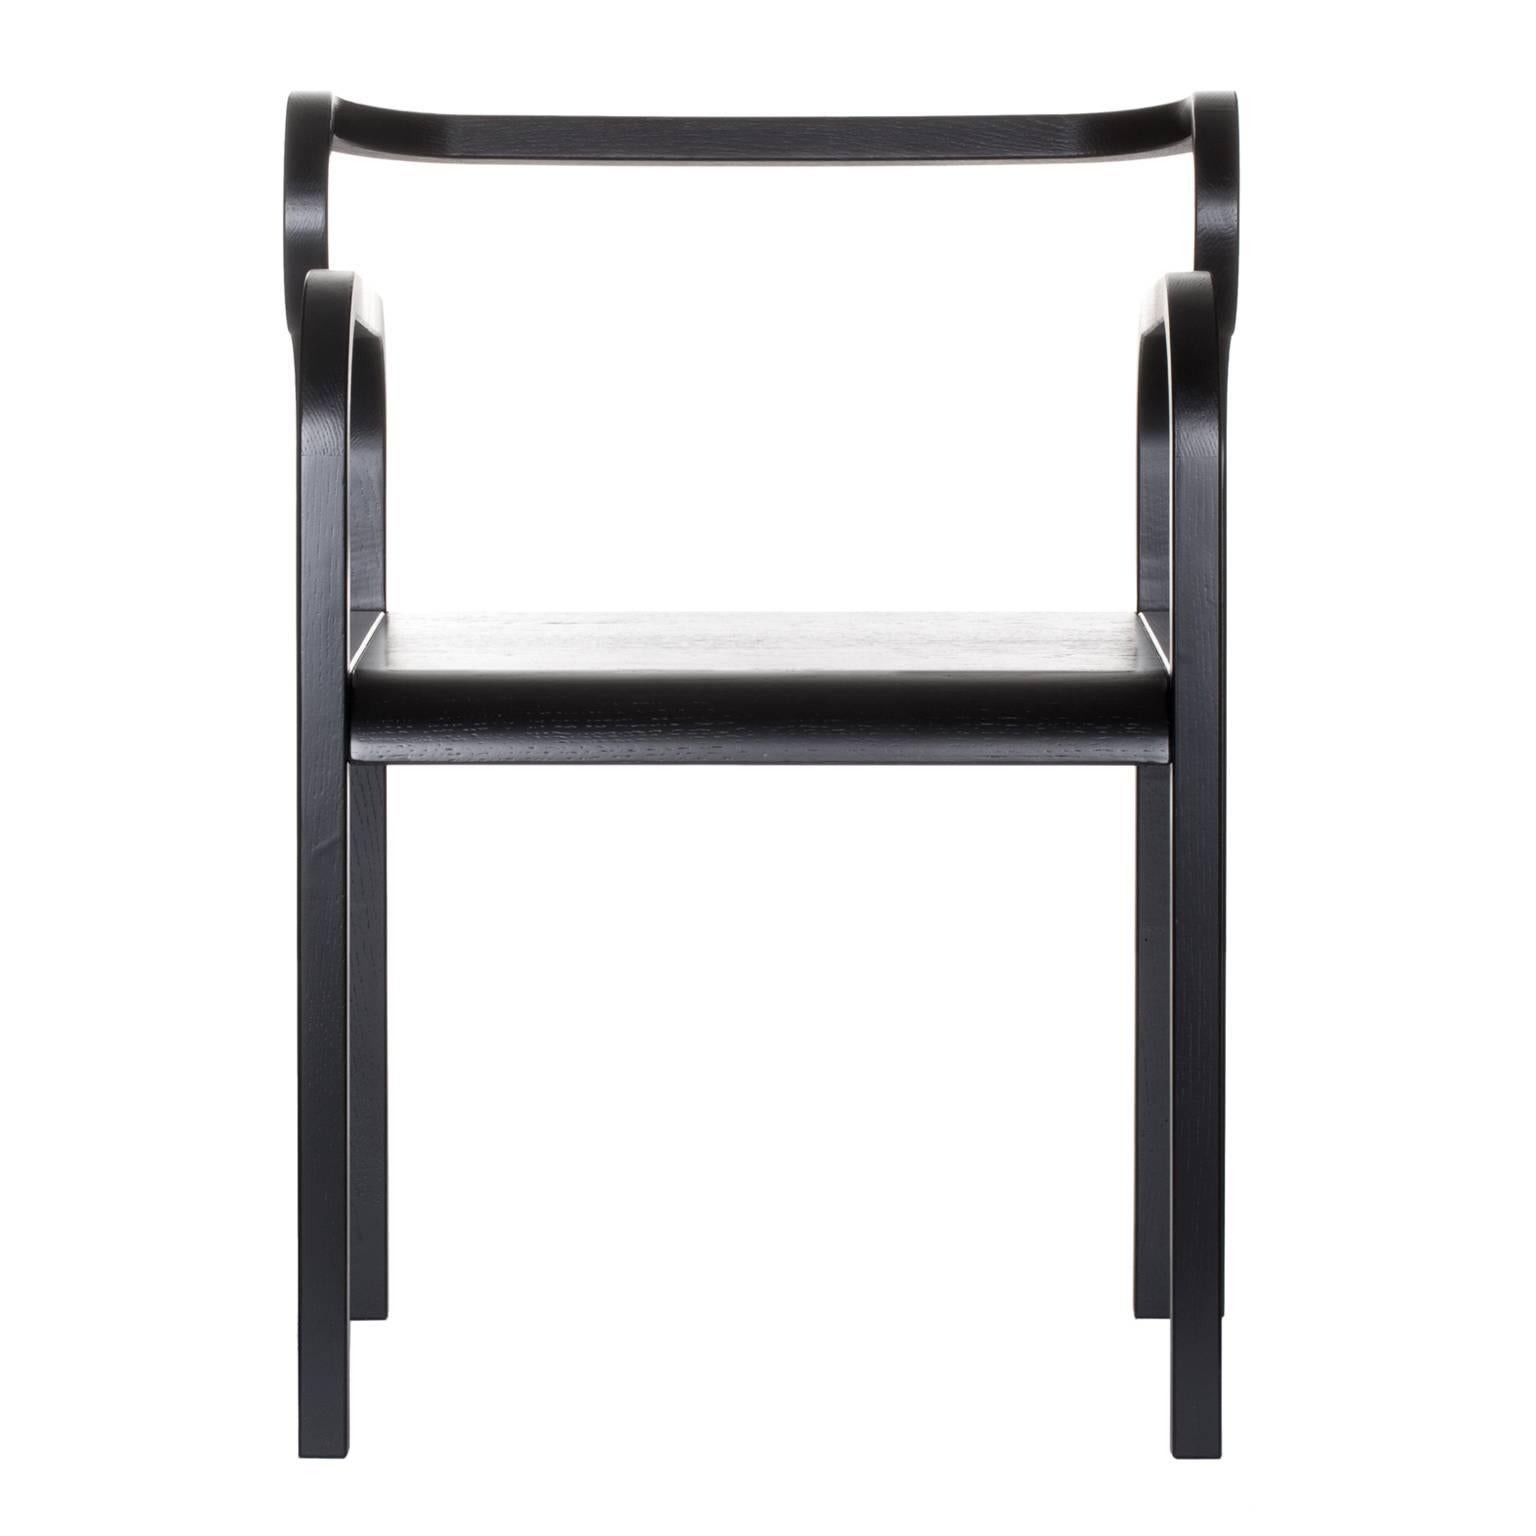 Odette Curvy Dining Chair with armrests in Black Solid Oak Wood by Fred&Juul